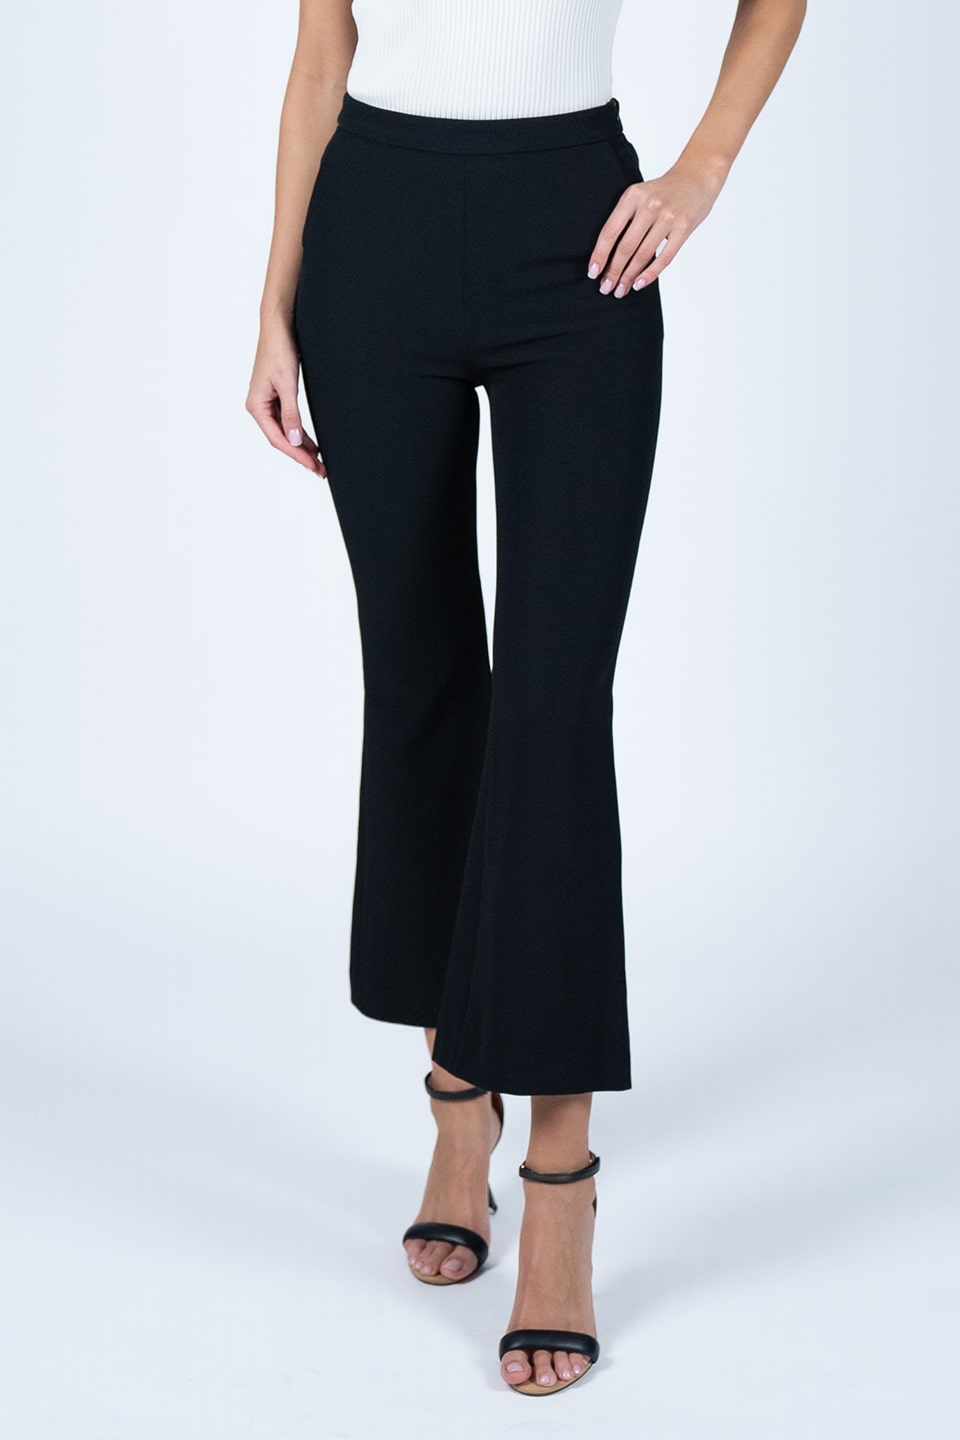 Designer Black Women pants, shop online with free delivery in UAE. Product gallery 2